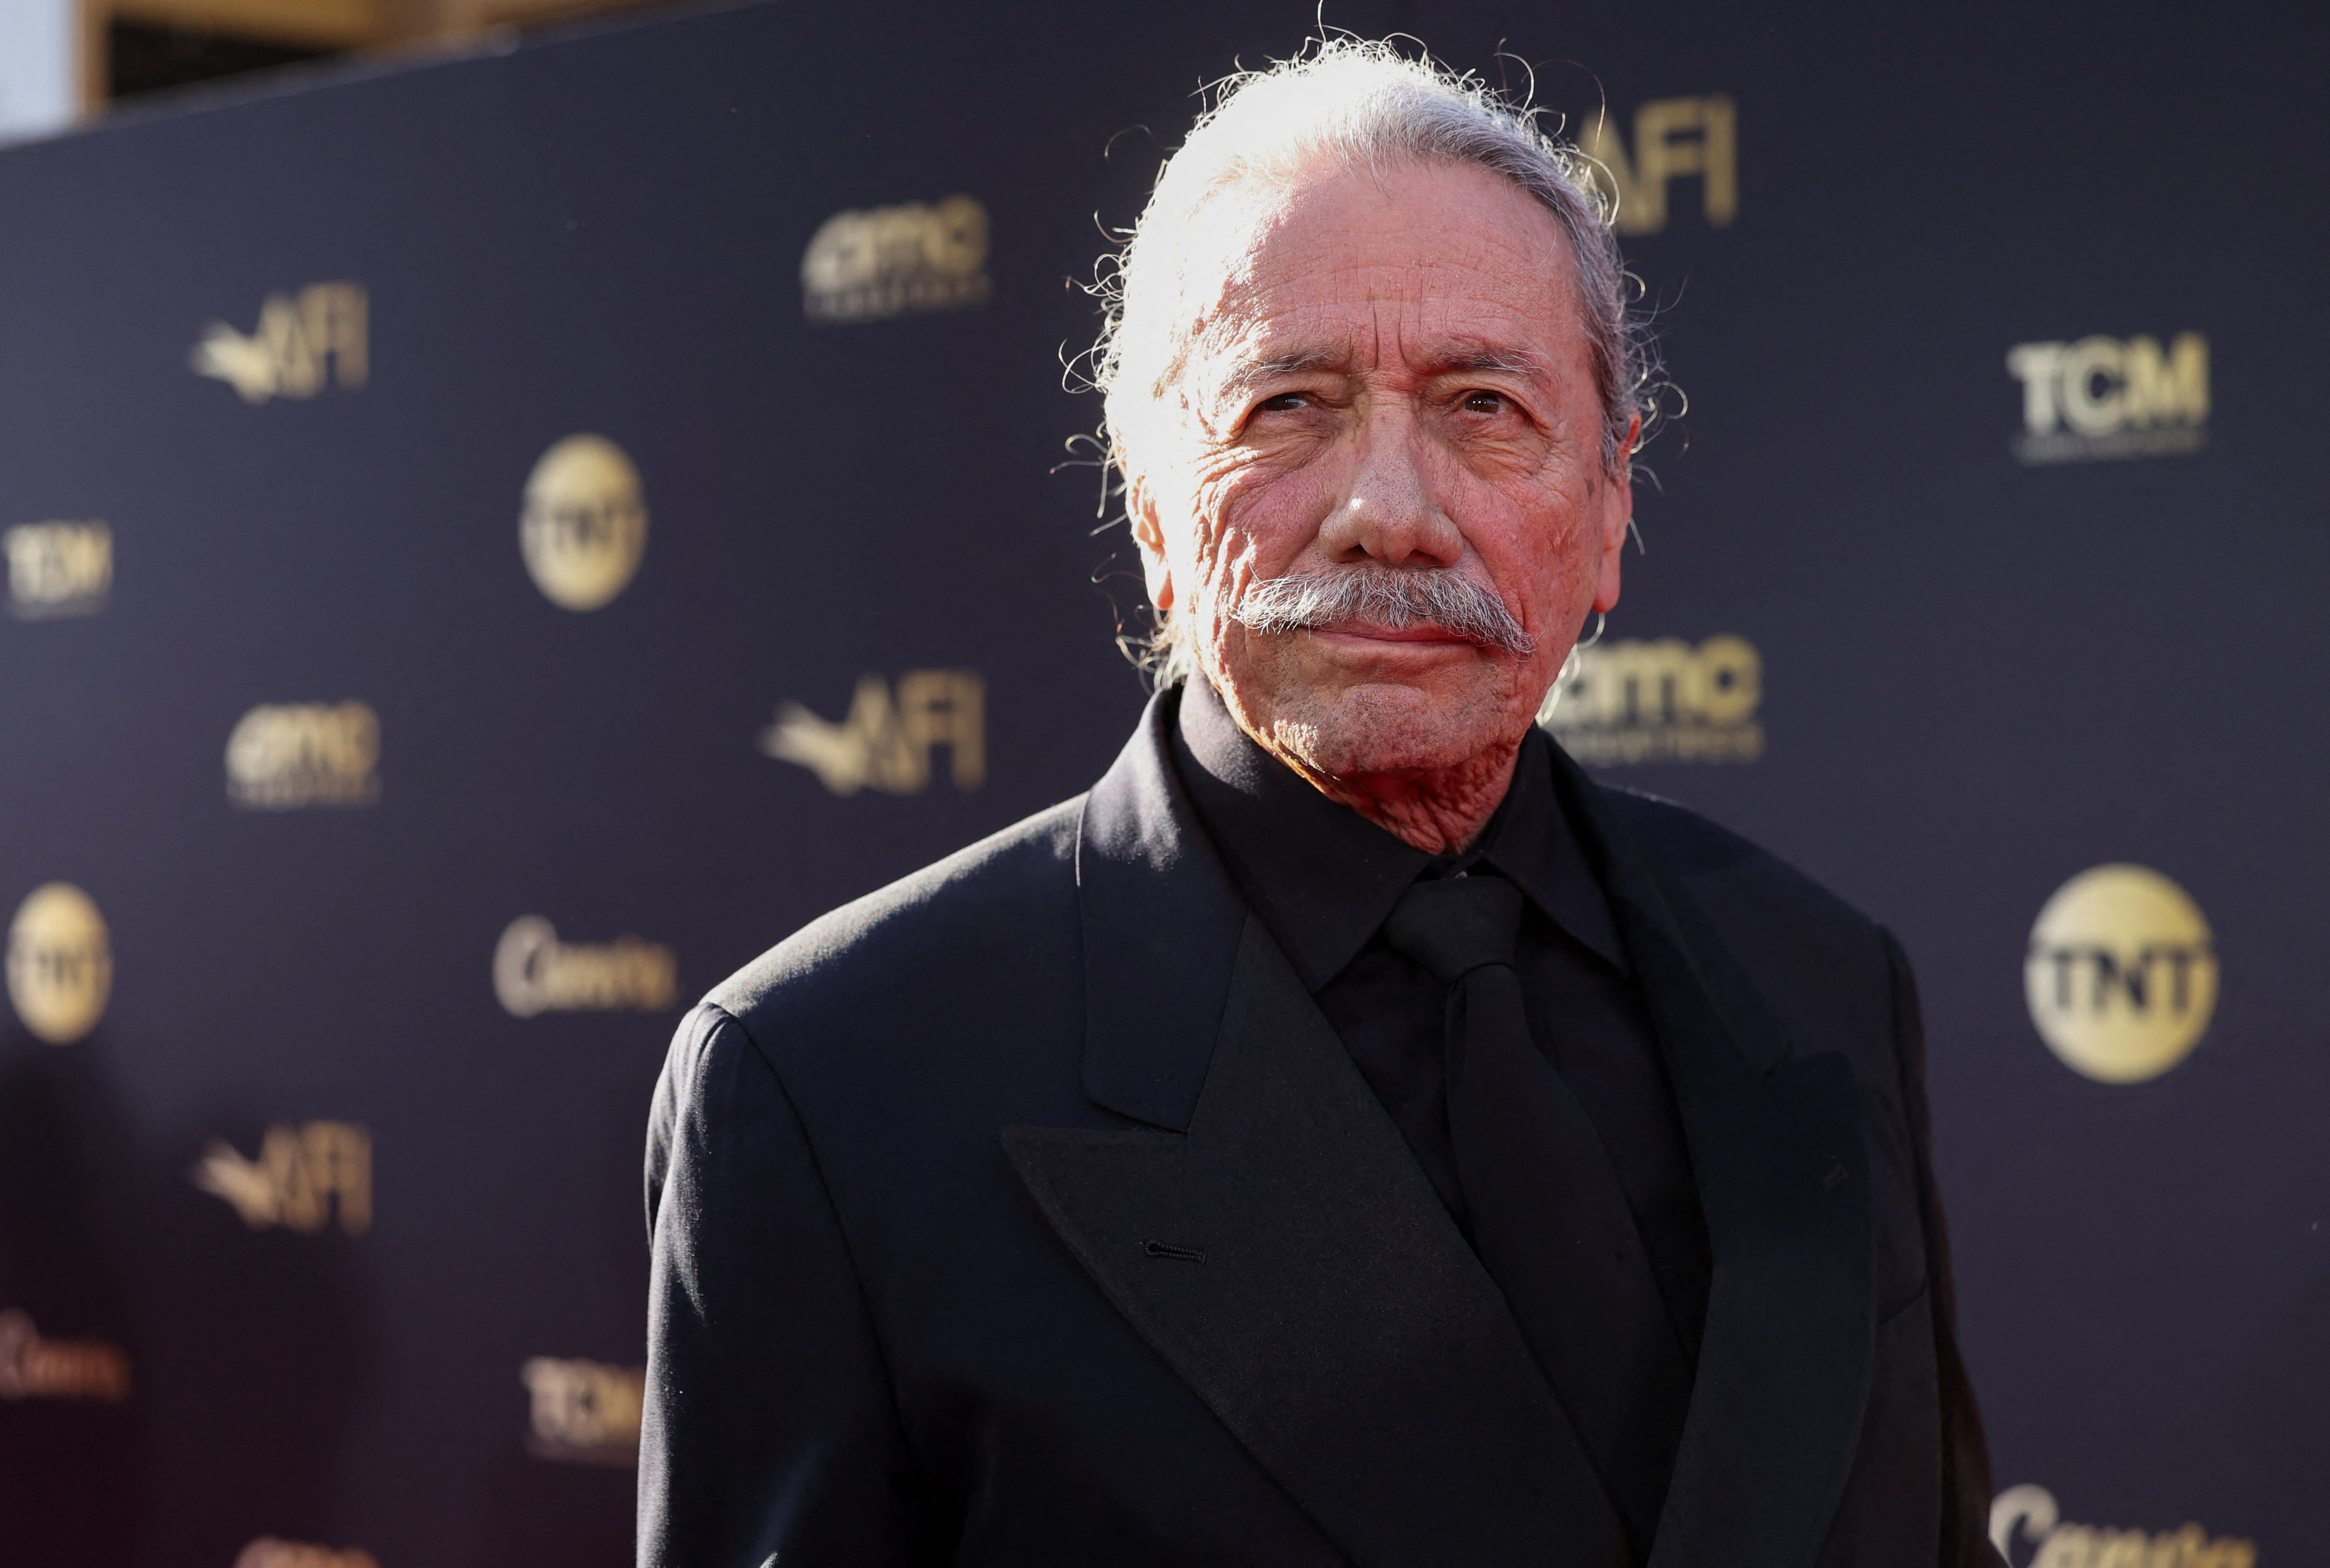 Edward James Olmos wearing a black suit with a black shirt and tie